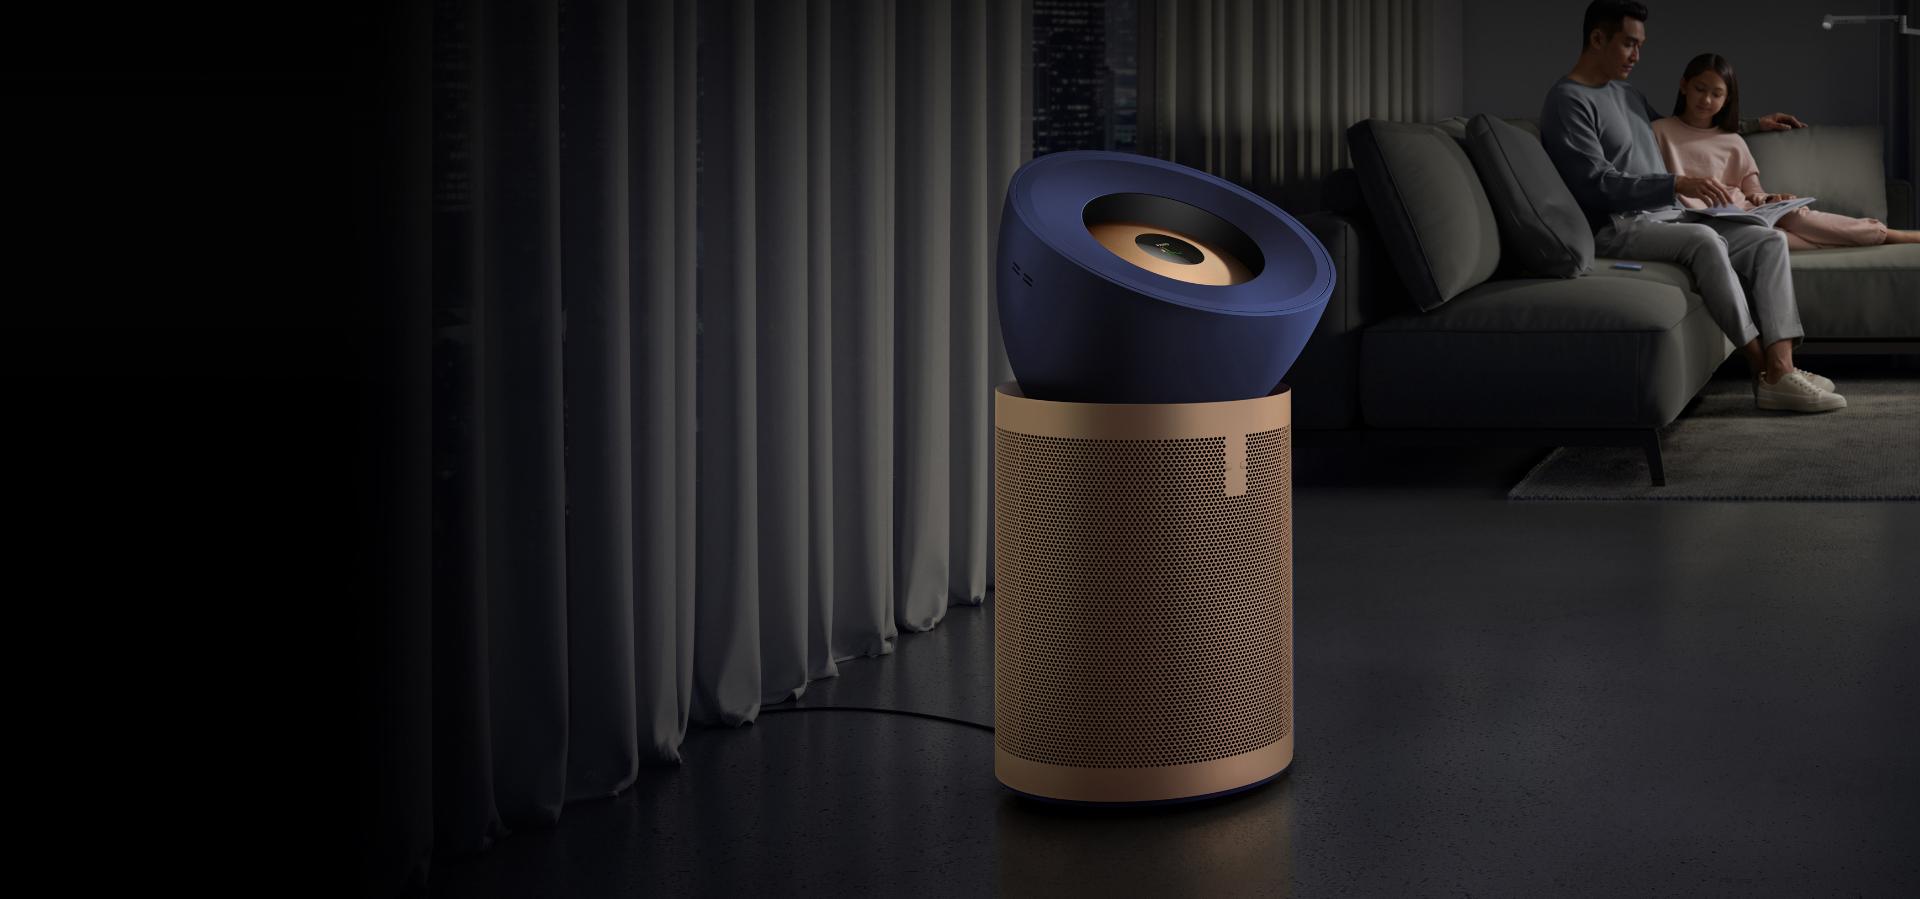 Dyson Purifier Big+Quiet Formaldehyde in a living space at night.